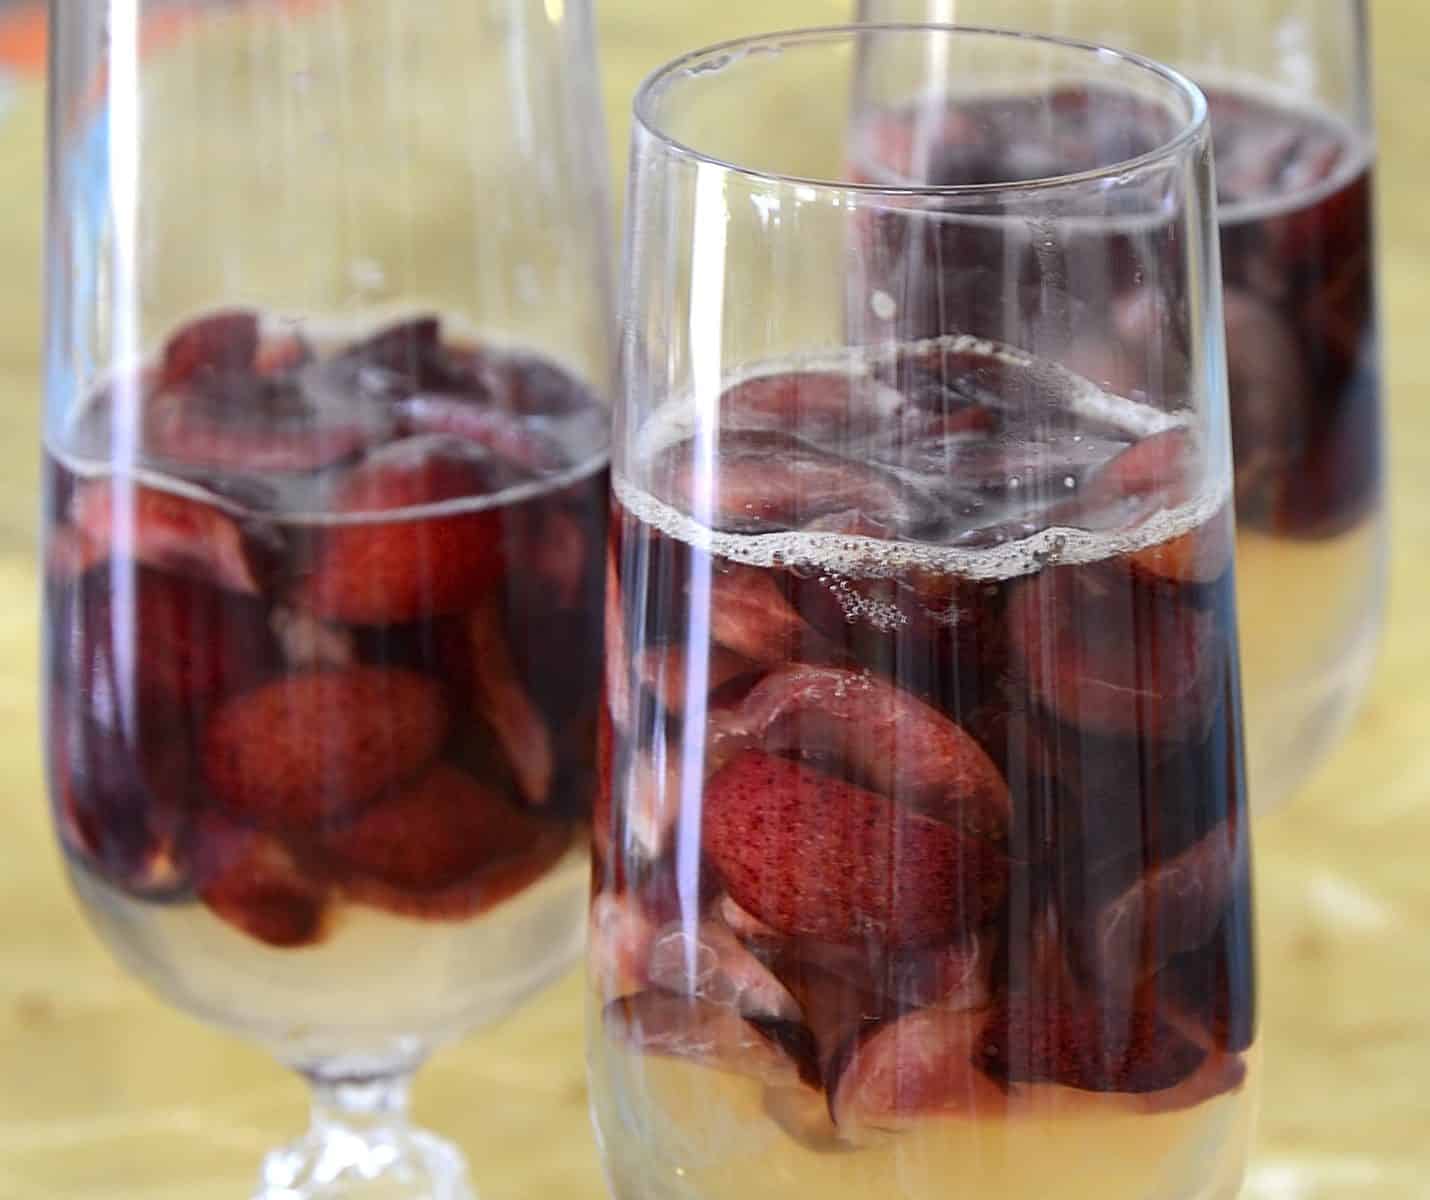 Champagne gelatin with fresh cherries in a champagne flute.